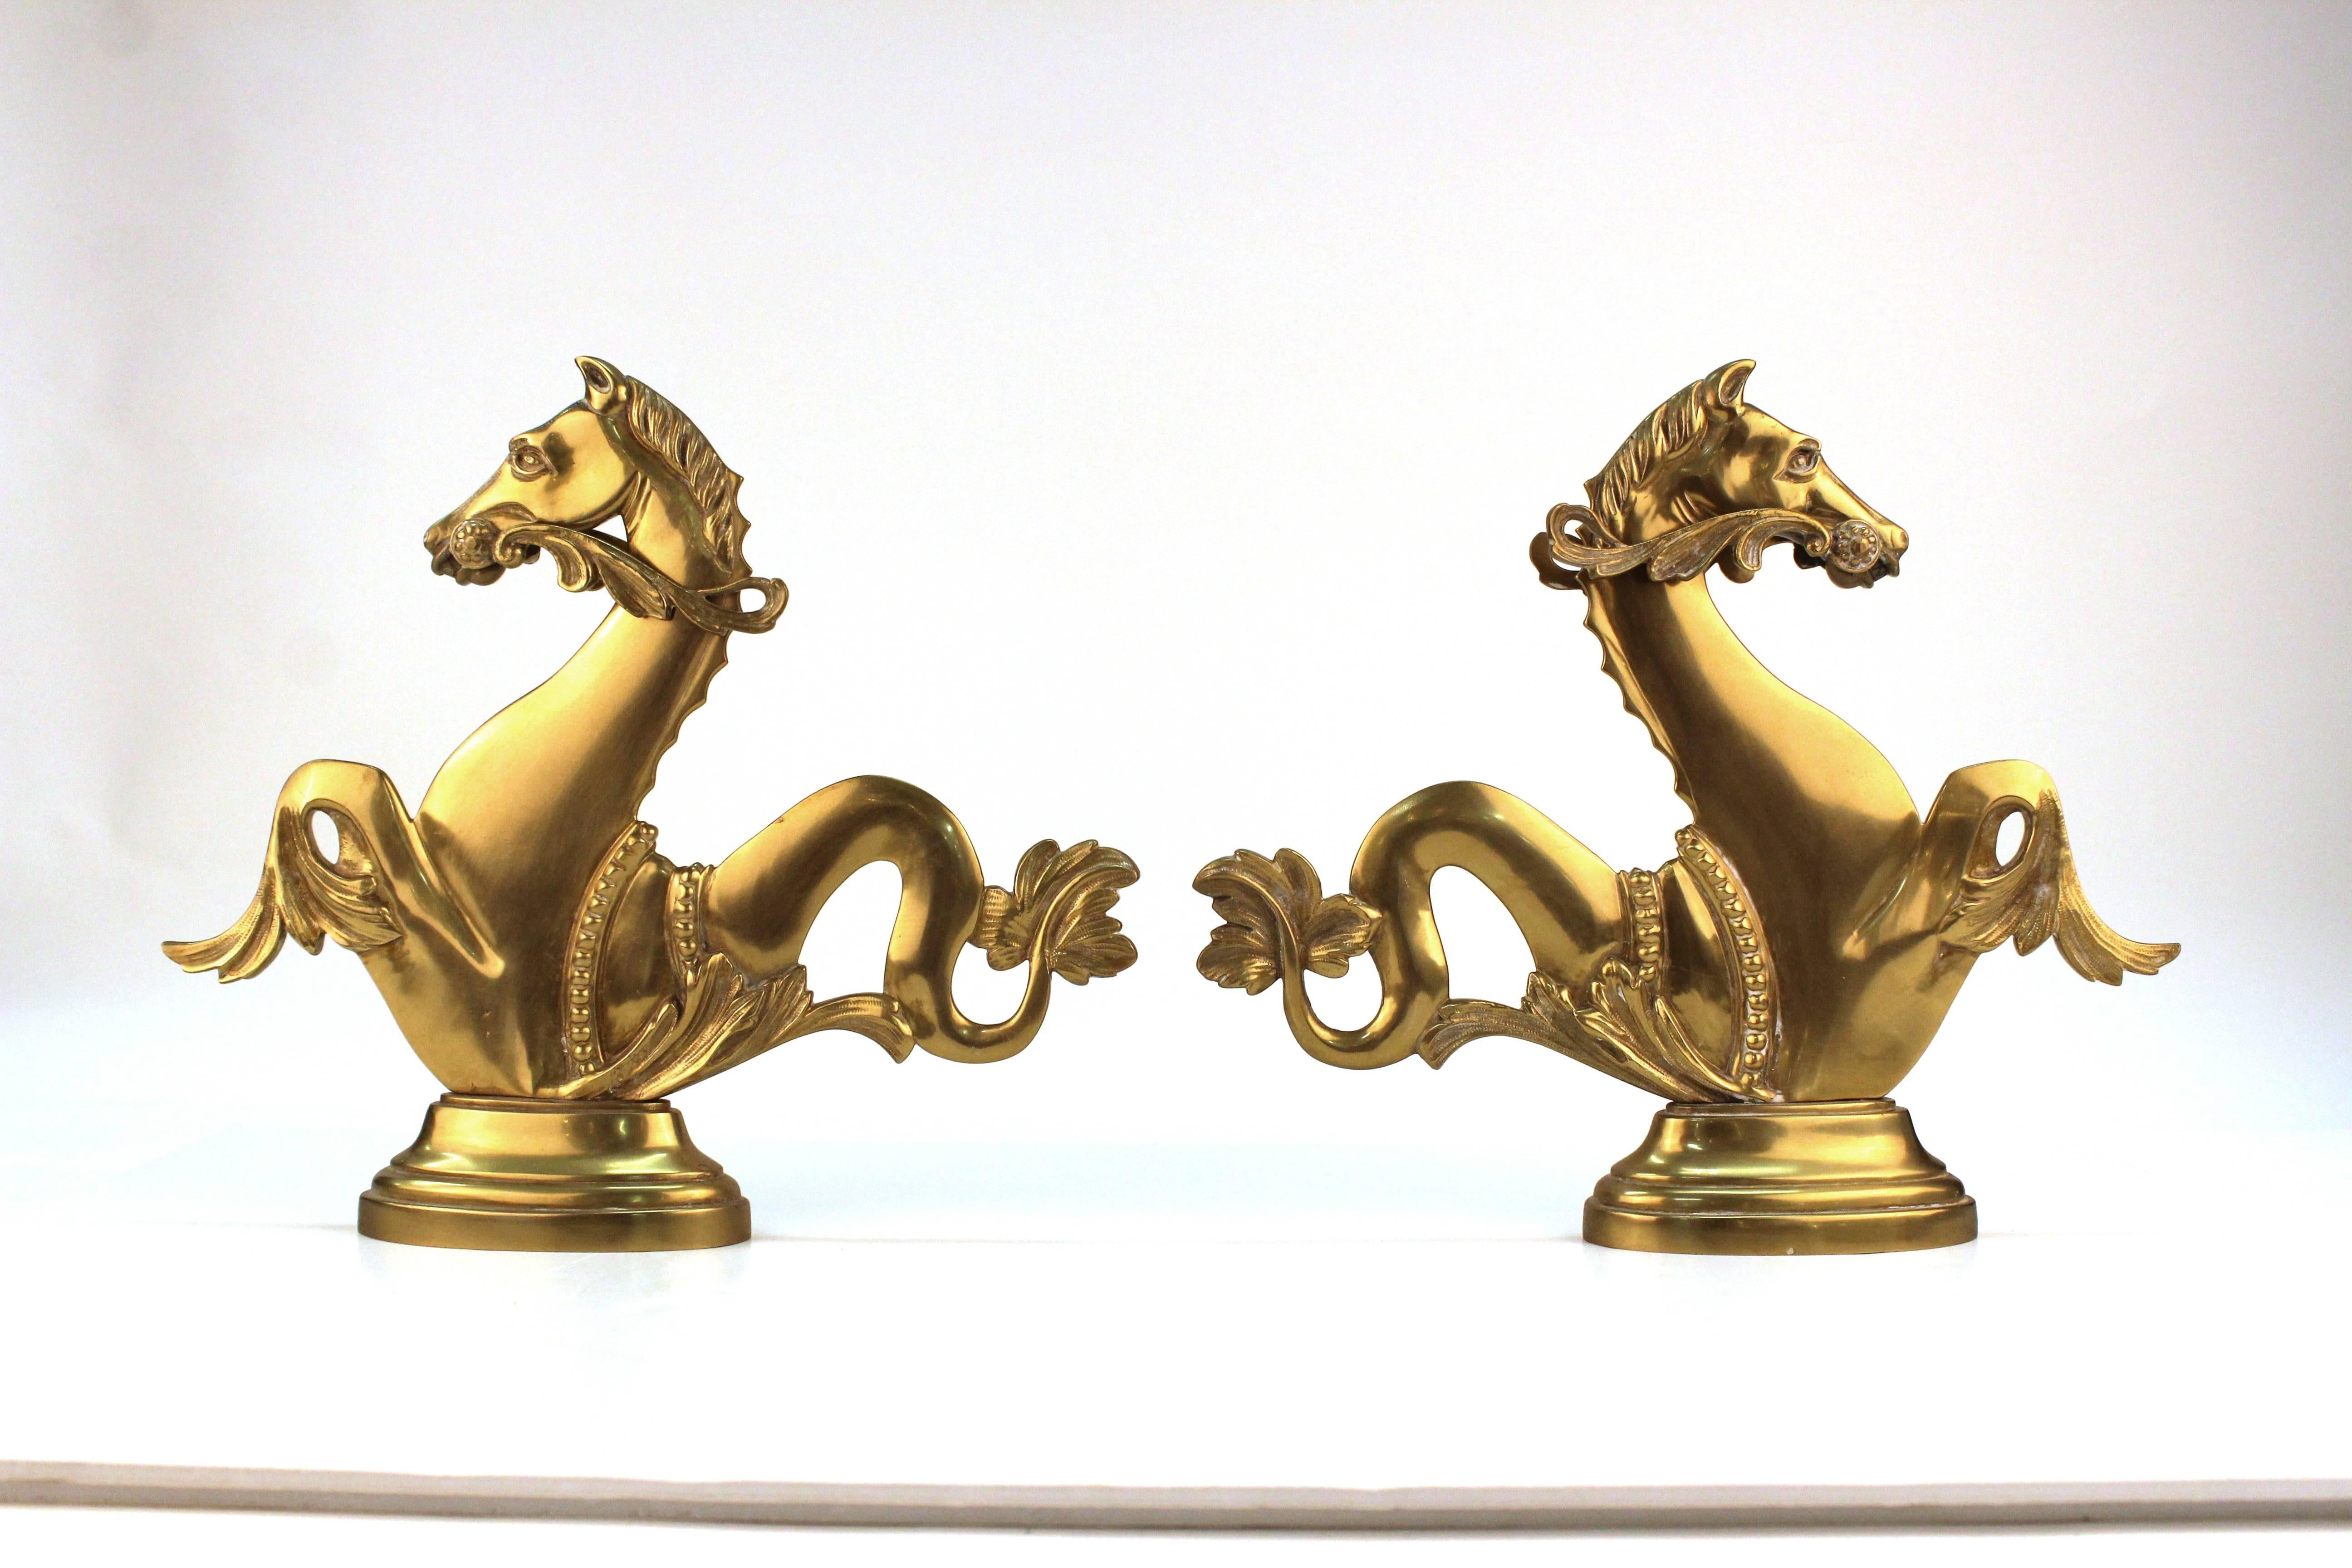 A pair of vintage brass gondola horses from Venice. These horses, also known as Seahorses or Hippocampi, are replicas of the ones used as decorative cleats on gondolas.